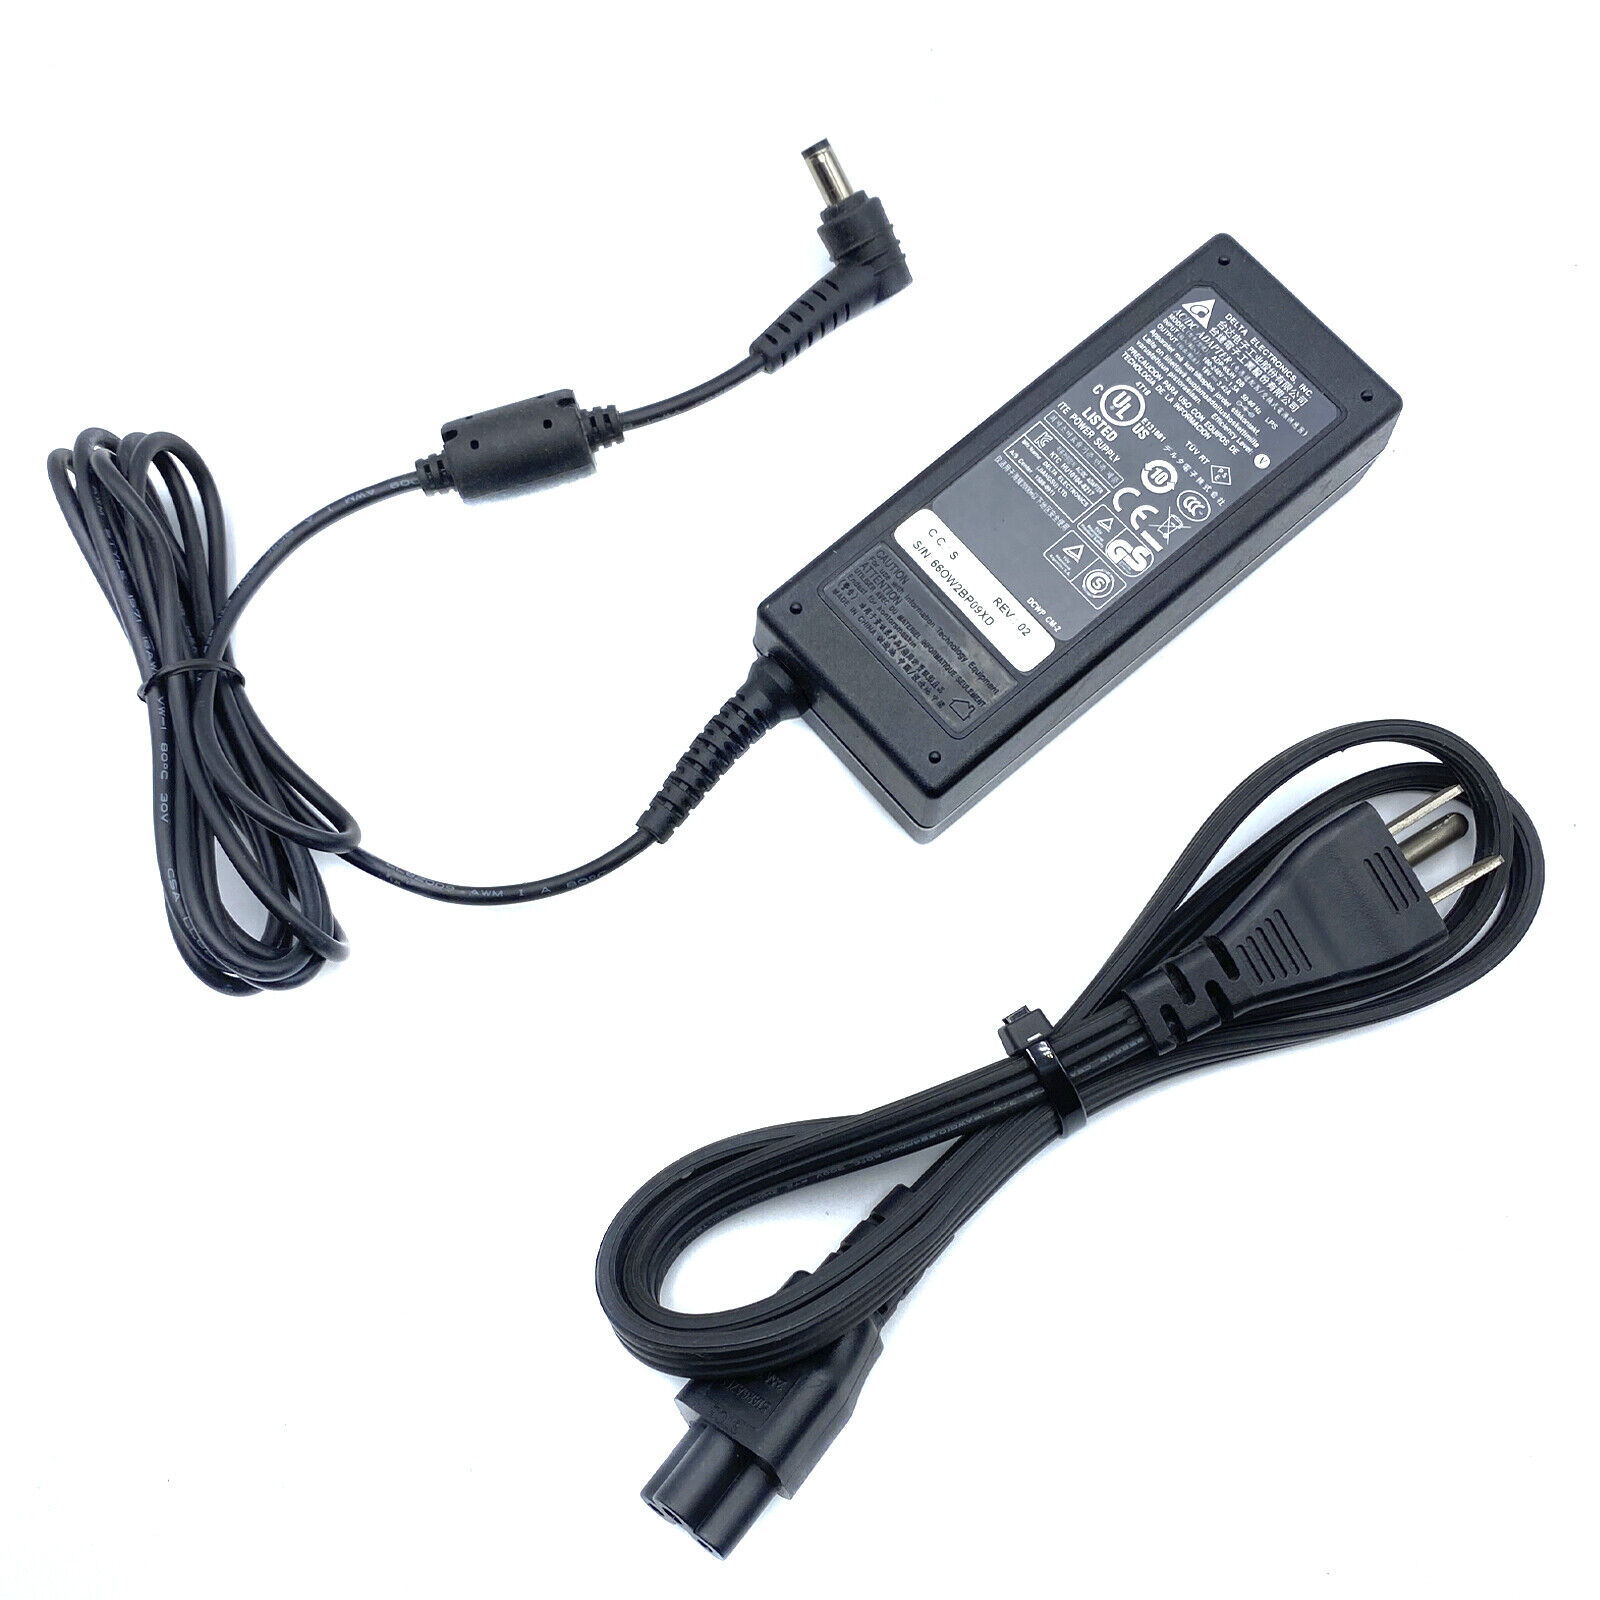 Genuine Delta Power Supply Charger for Asus UL50 UL50Vs UL50Vs-A1B UL80 W/P.Cord